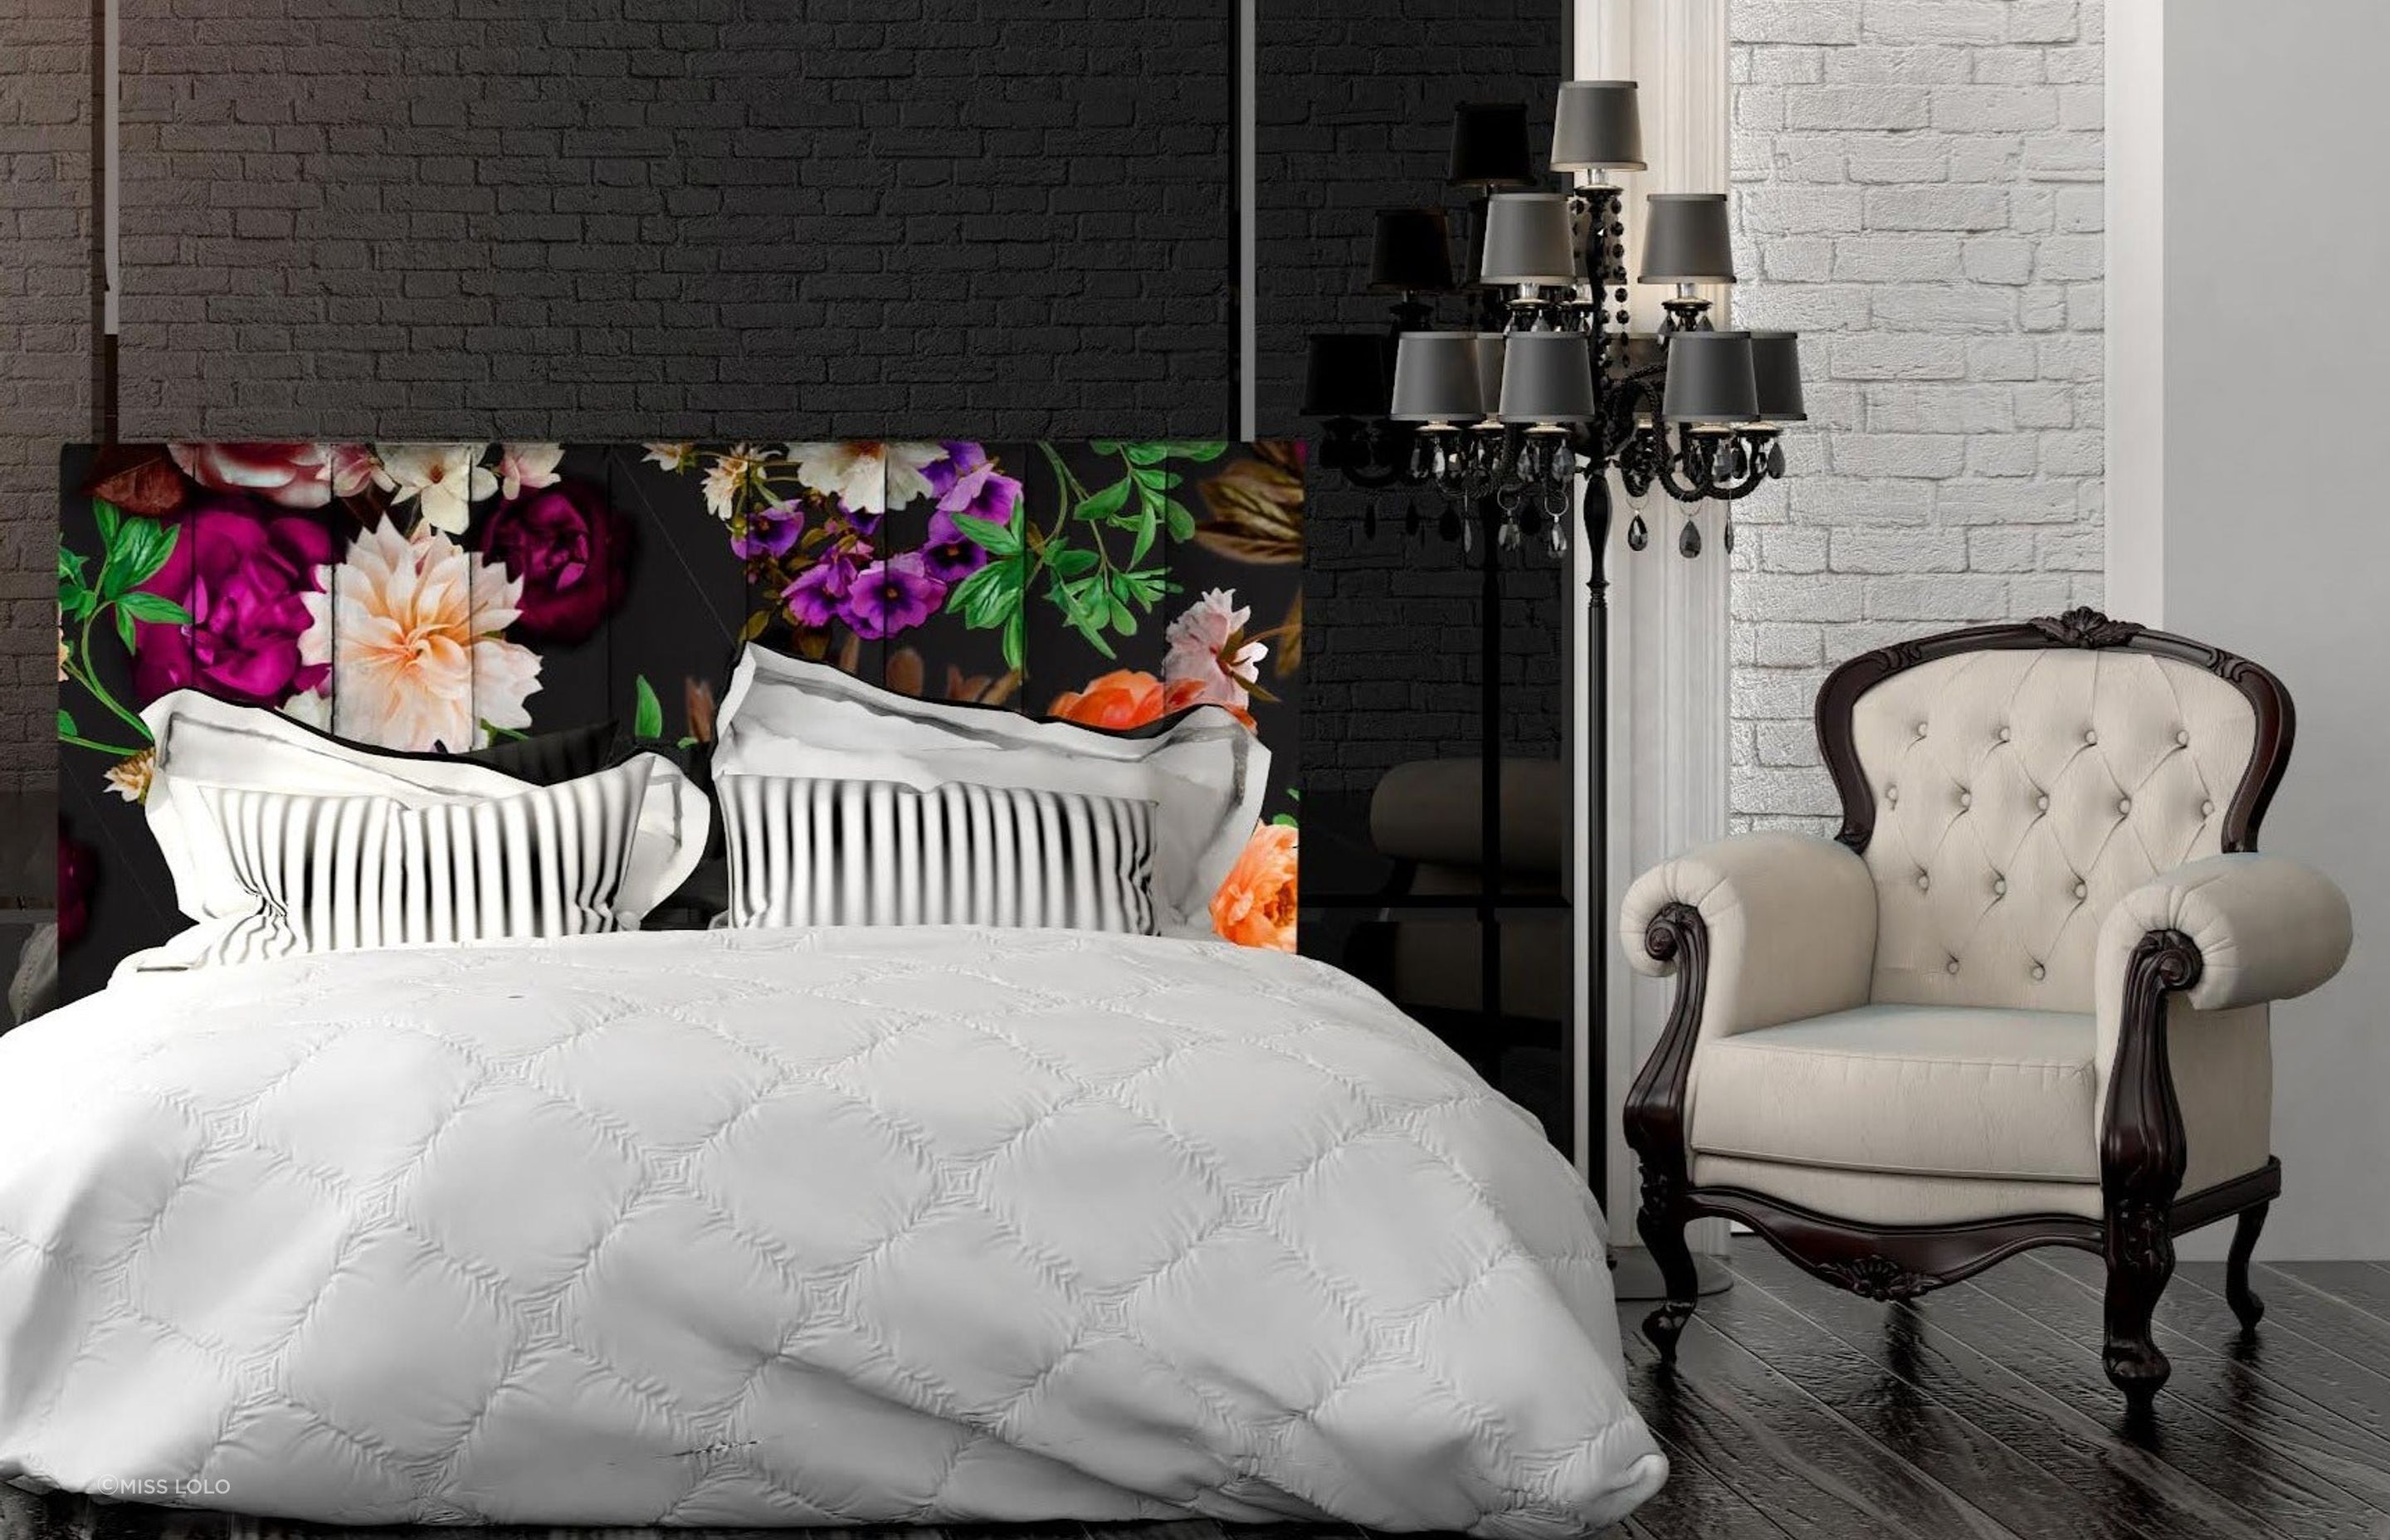 A high-impact headboard, like the Blooming Lovely Headboard, can be a real focal point for a bedroom.